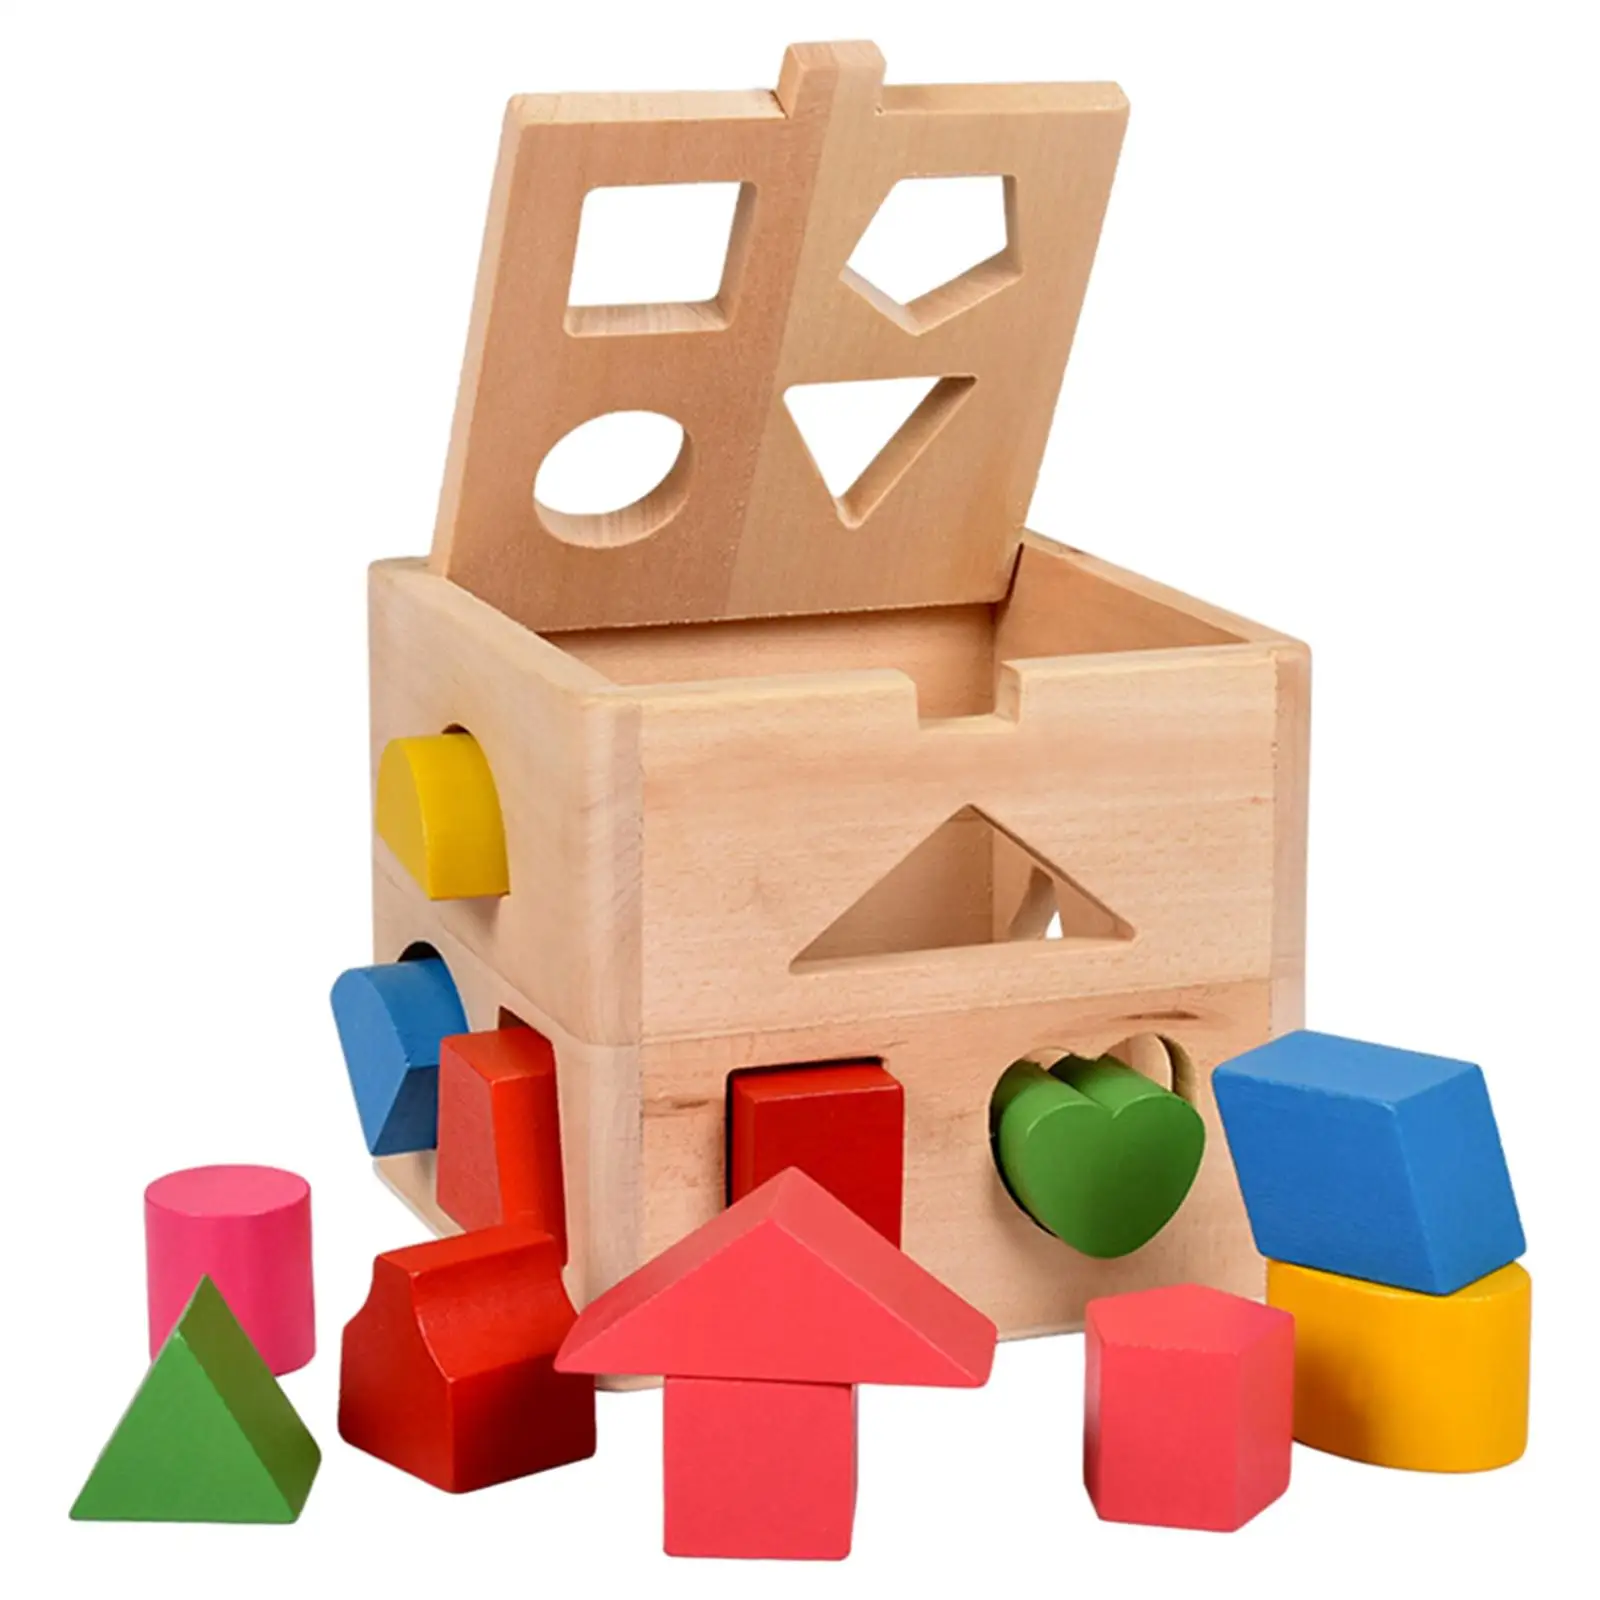 Wooden Shape Sorter Cube Geometric Shapes Toy Puzzles Preschool Learning Toys for Kids Girls Preschool Holiday Gifts